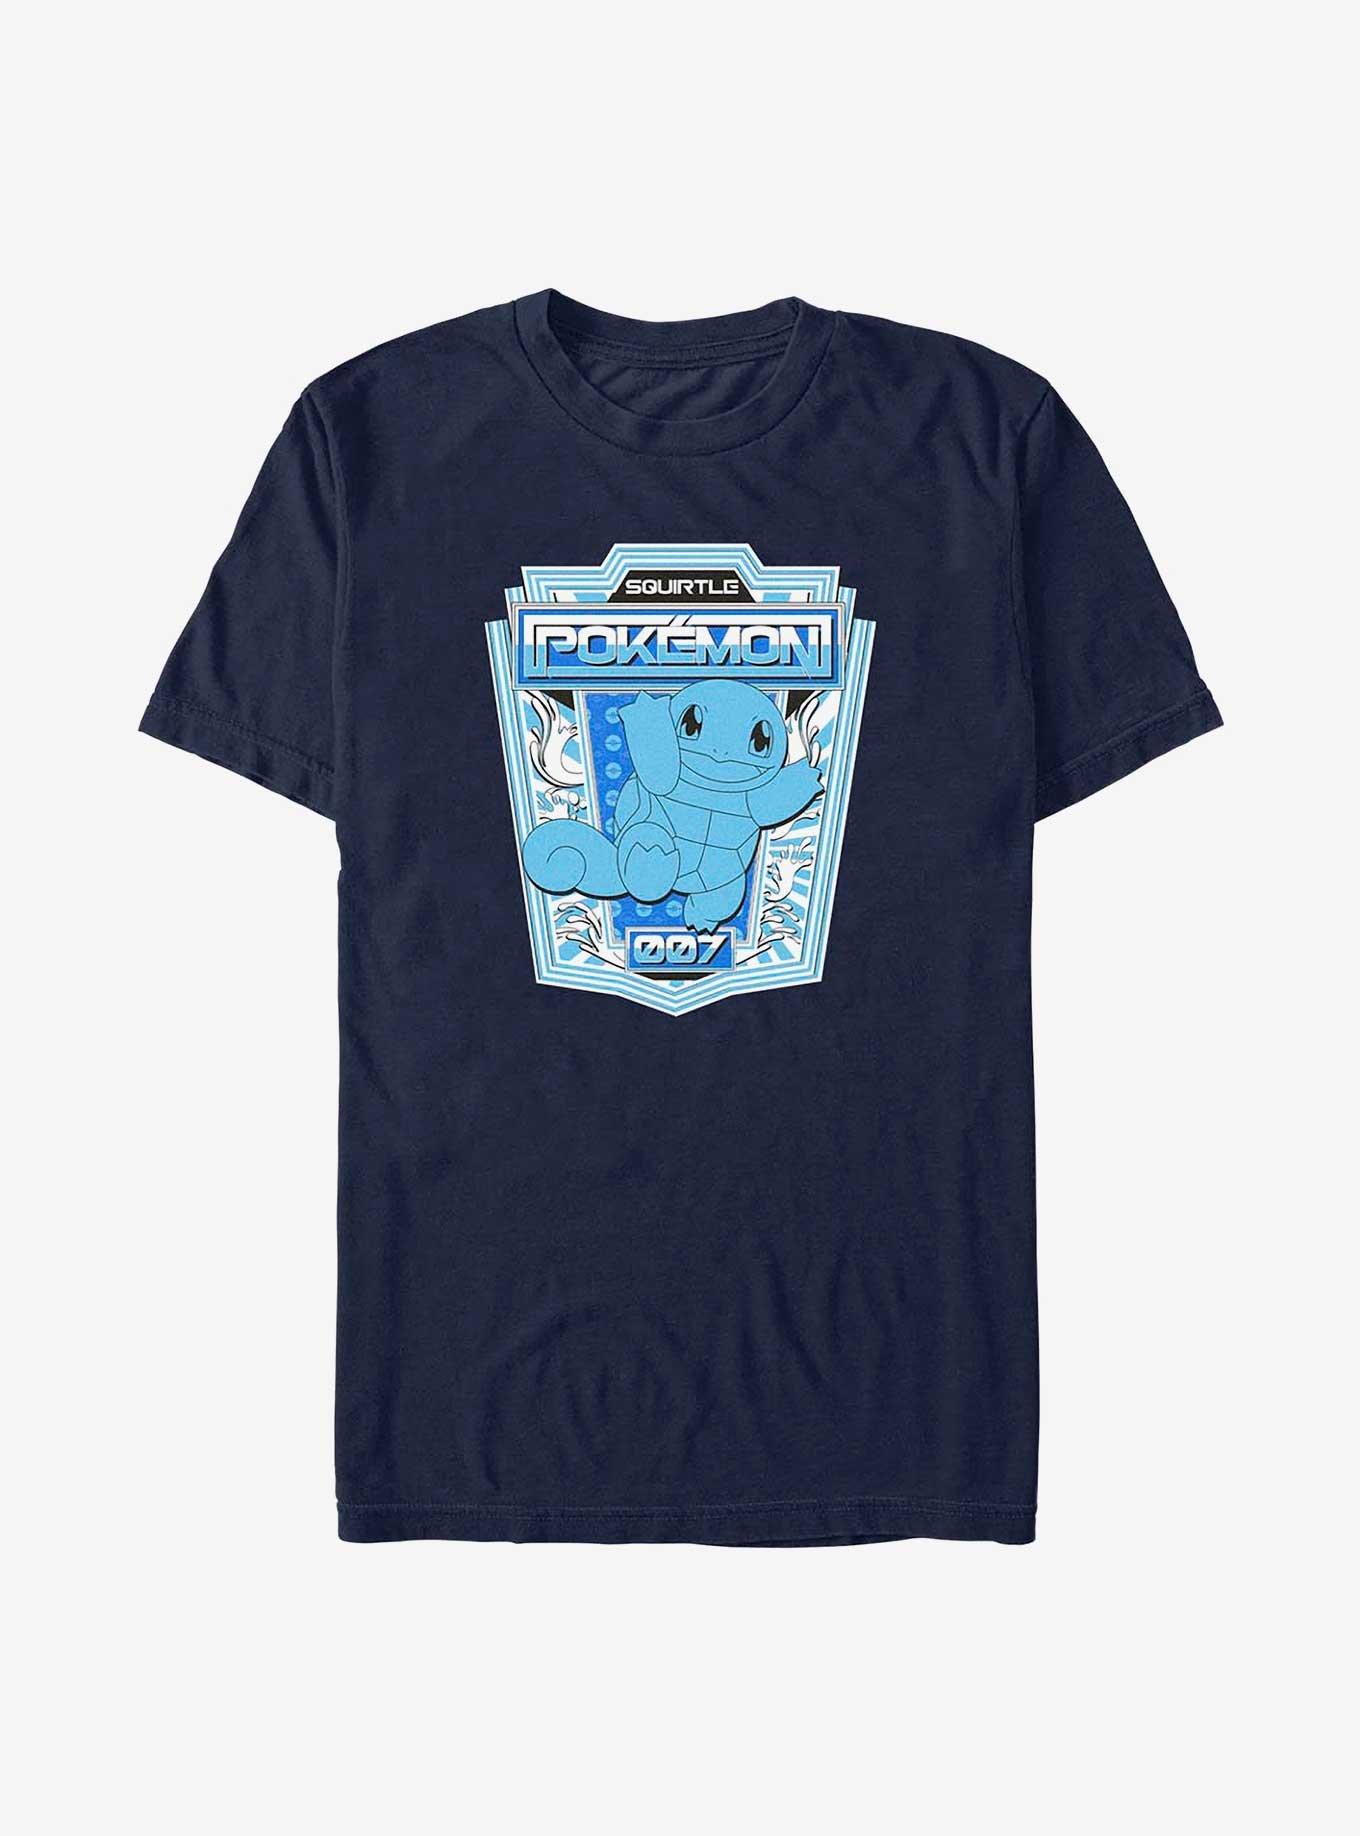 Pokemon Squirtle Badge T-Shirt, NAVY, hi-res